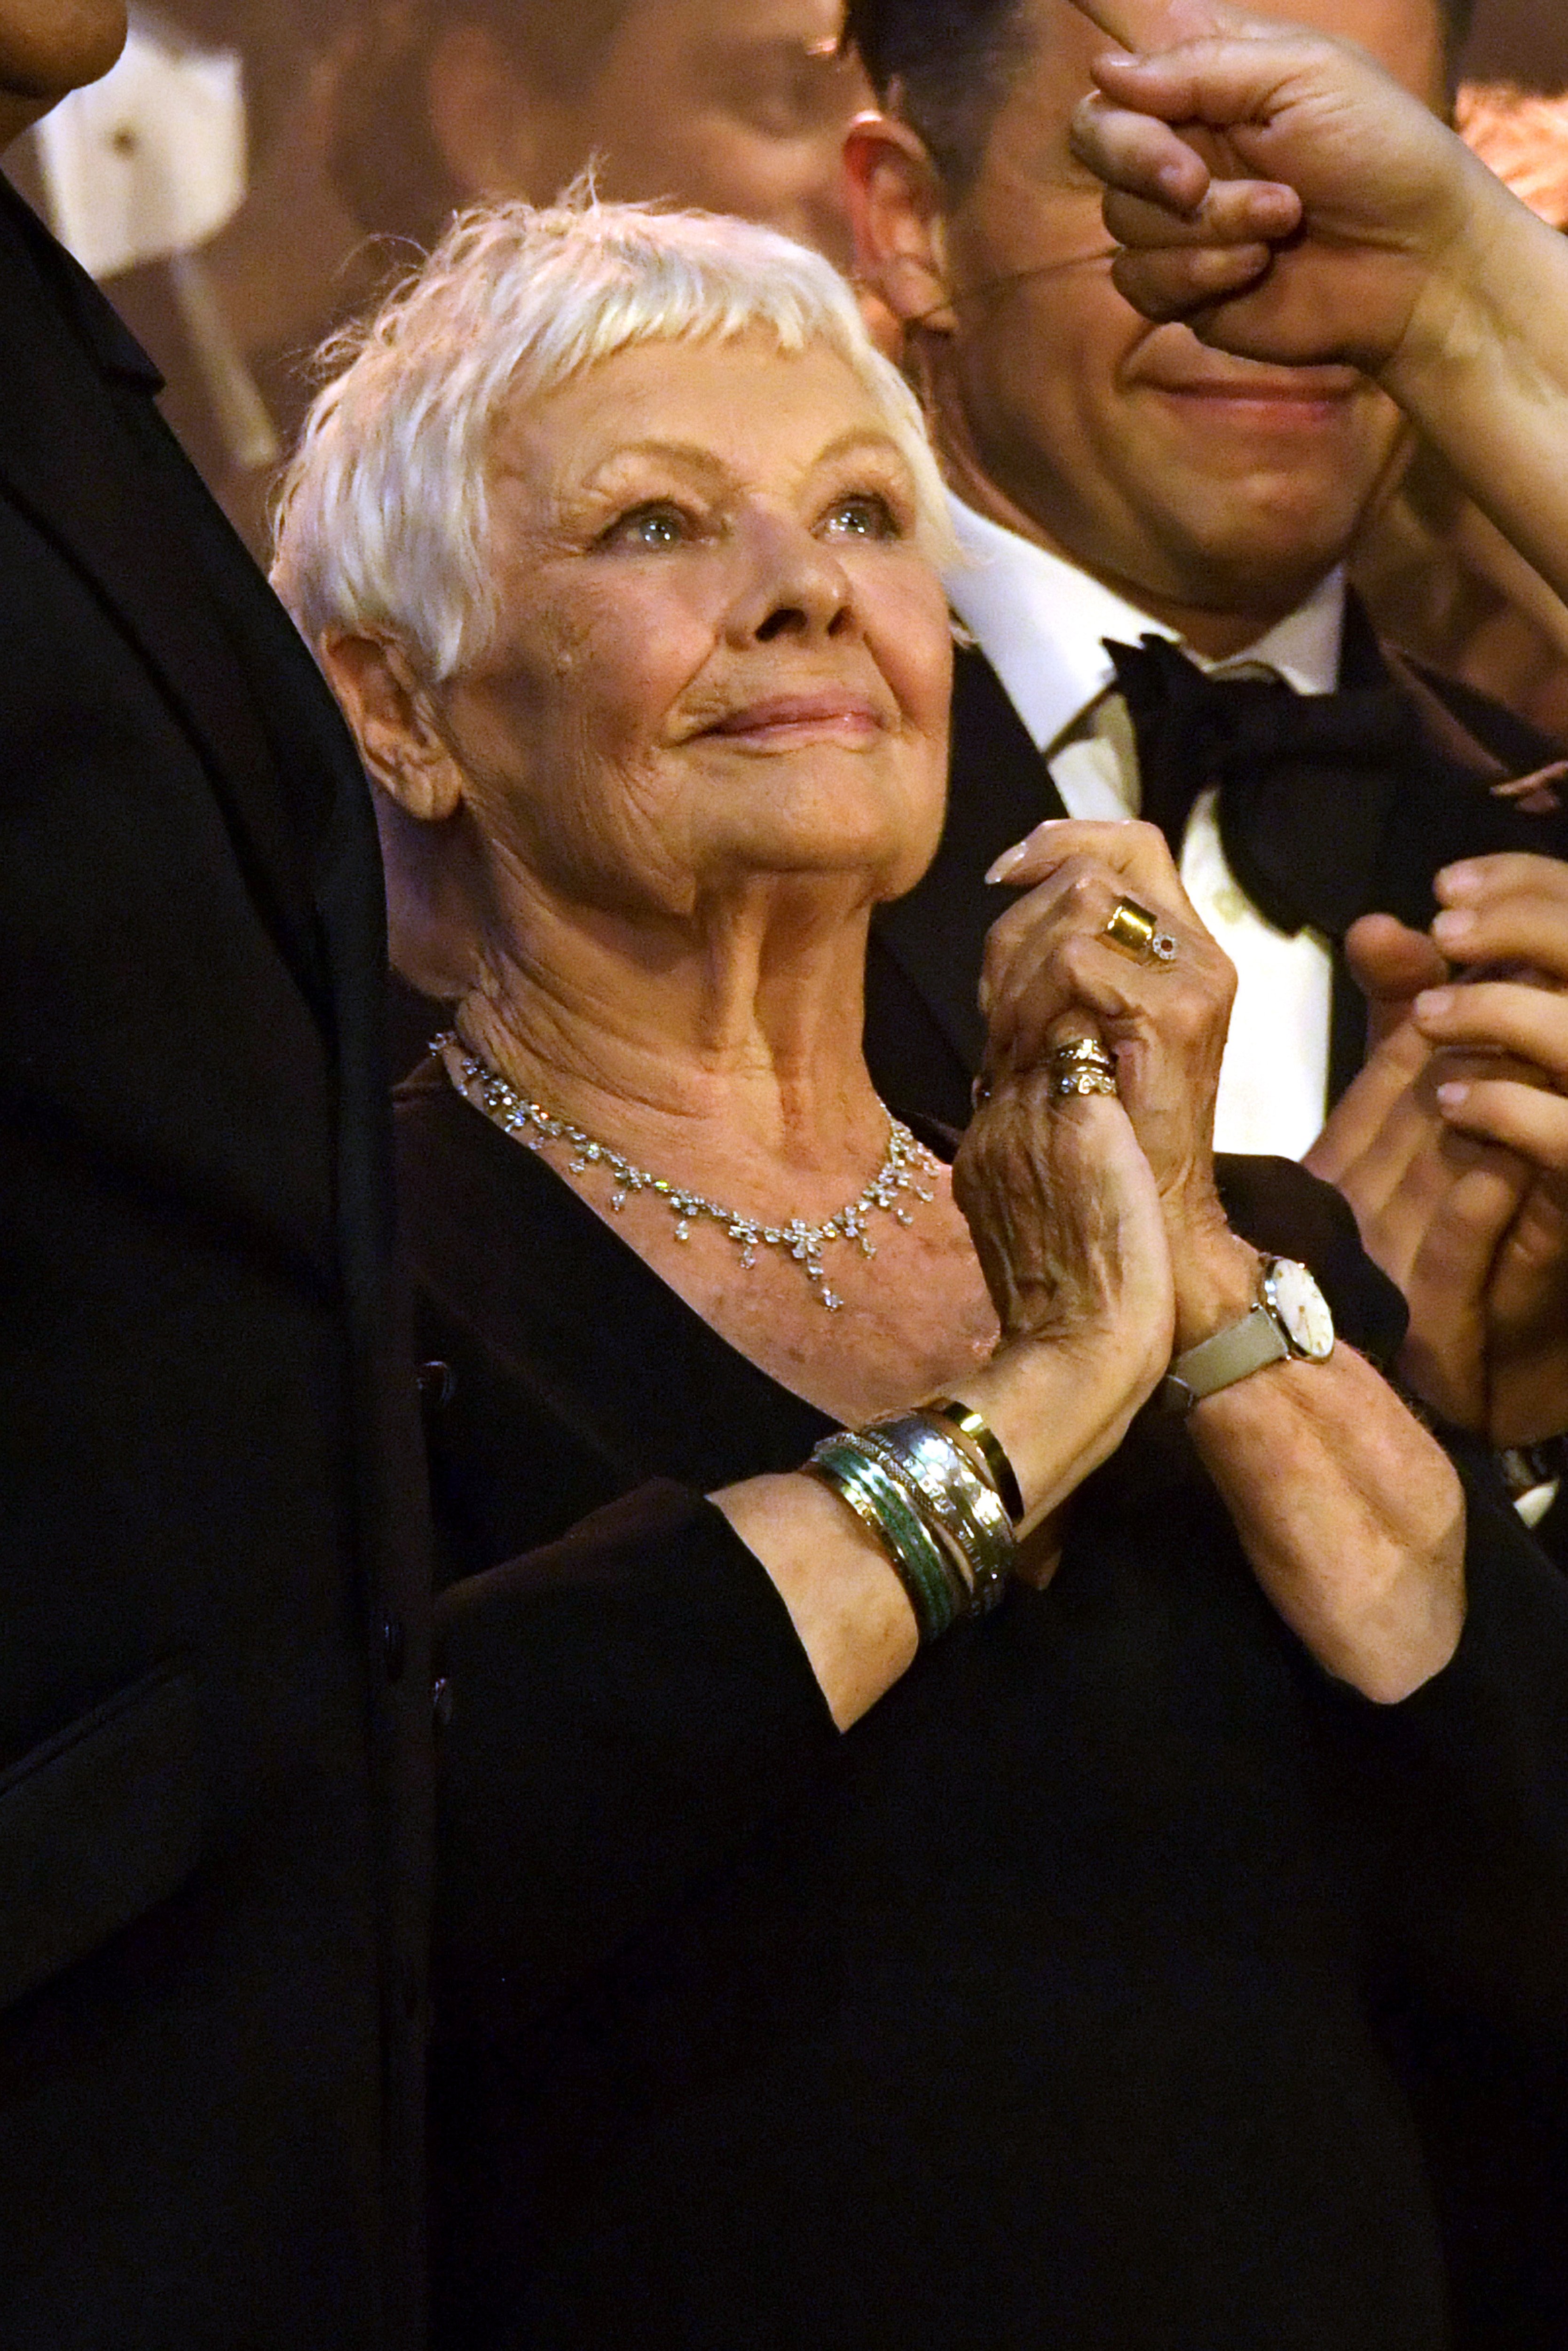 Judi Dench bows at the curtain call during the Gala performance of "Sondheim's Old Friends" in aid of the Stephen Sondheim Foundation at Sondheim Theatre on May 3, 2022, in London, England. | Source: Getty Images